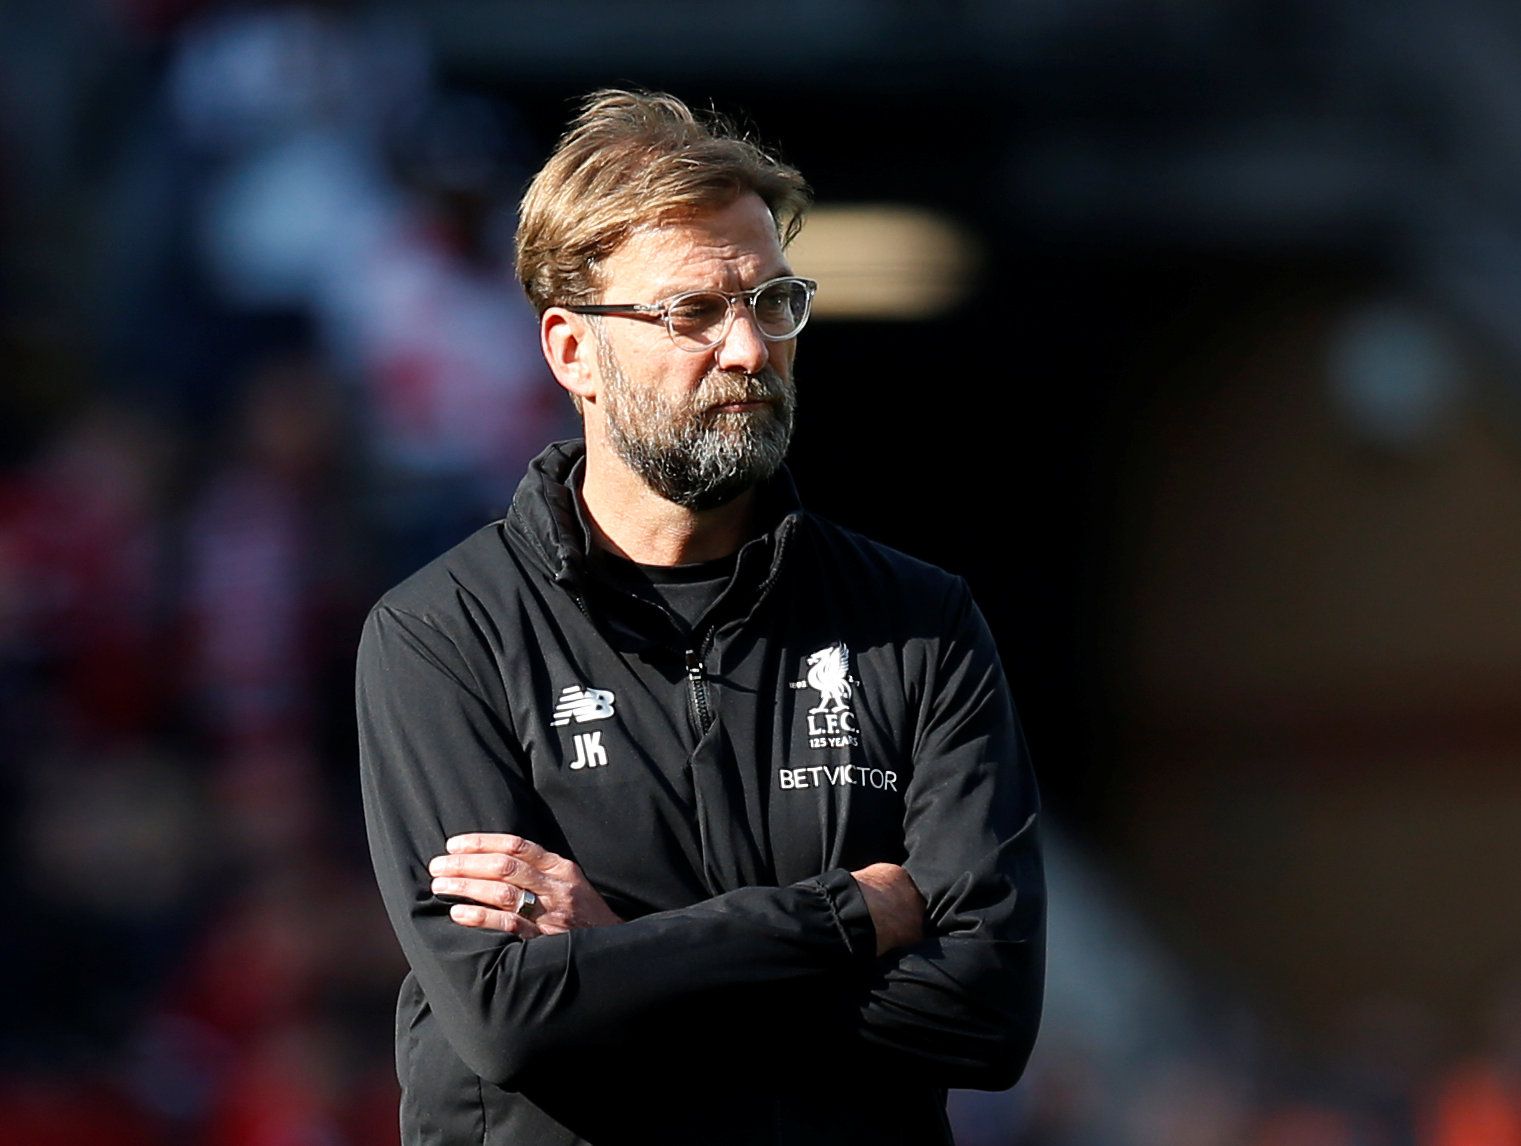 Soccer Football - Premier League - Liverpool vs AFC Bournemouth - Anfield, Liverpool, Britain - April 14, 2018   Liverpool manager Juergen Klopp during the warm up before the match    REUTERS/Andrew Yates    EDITORIAL USE ONLY. No use with unauthorized audio, video, data, fixture lists, club/league logos or 